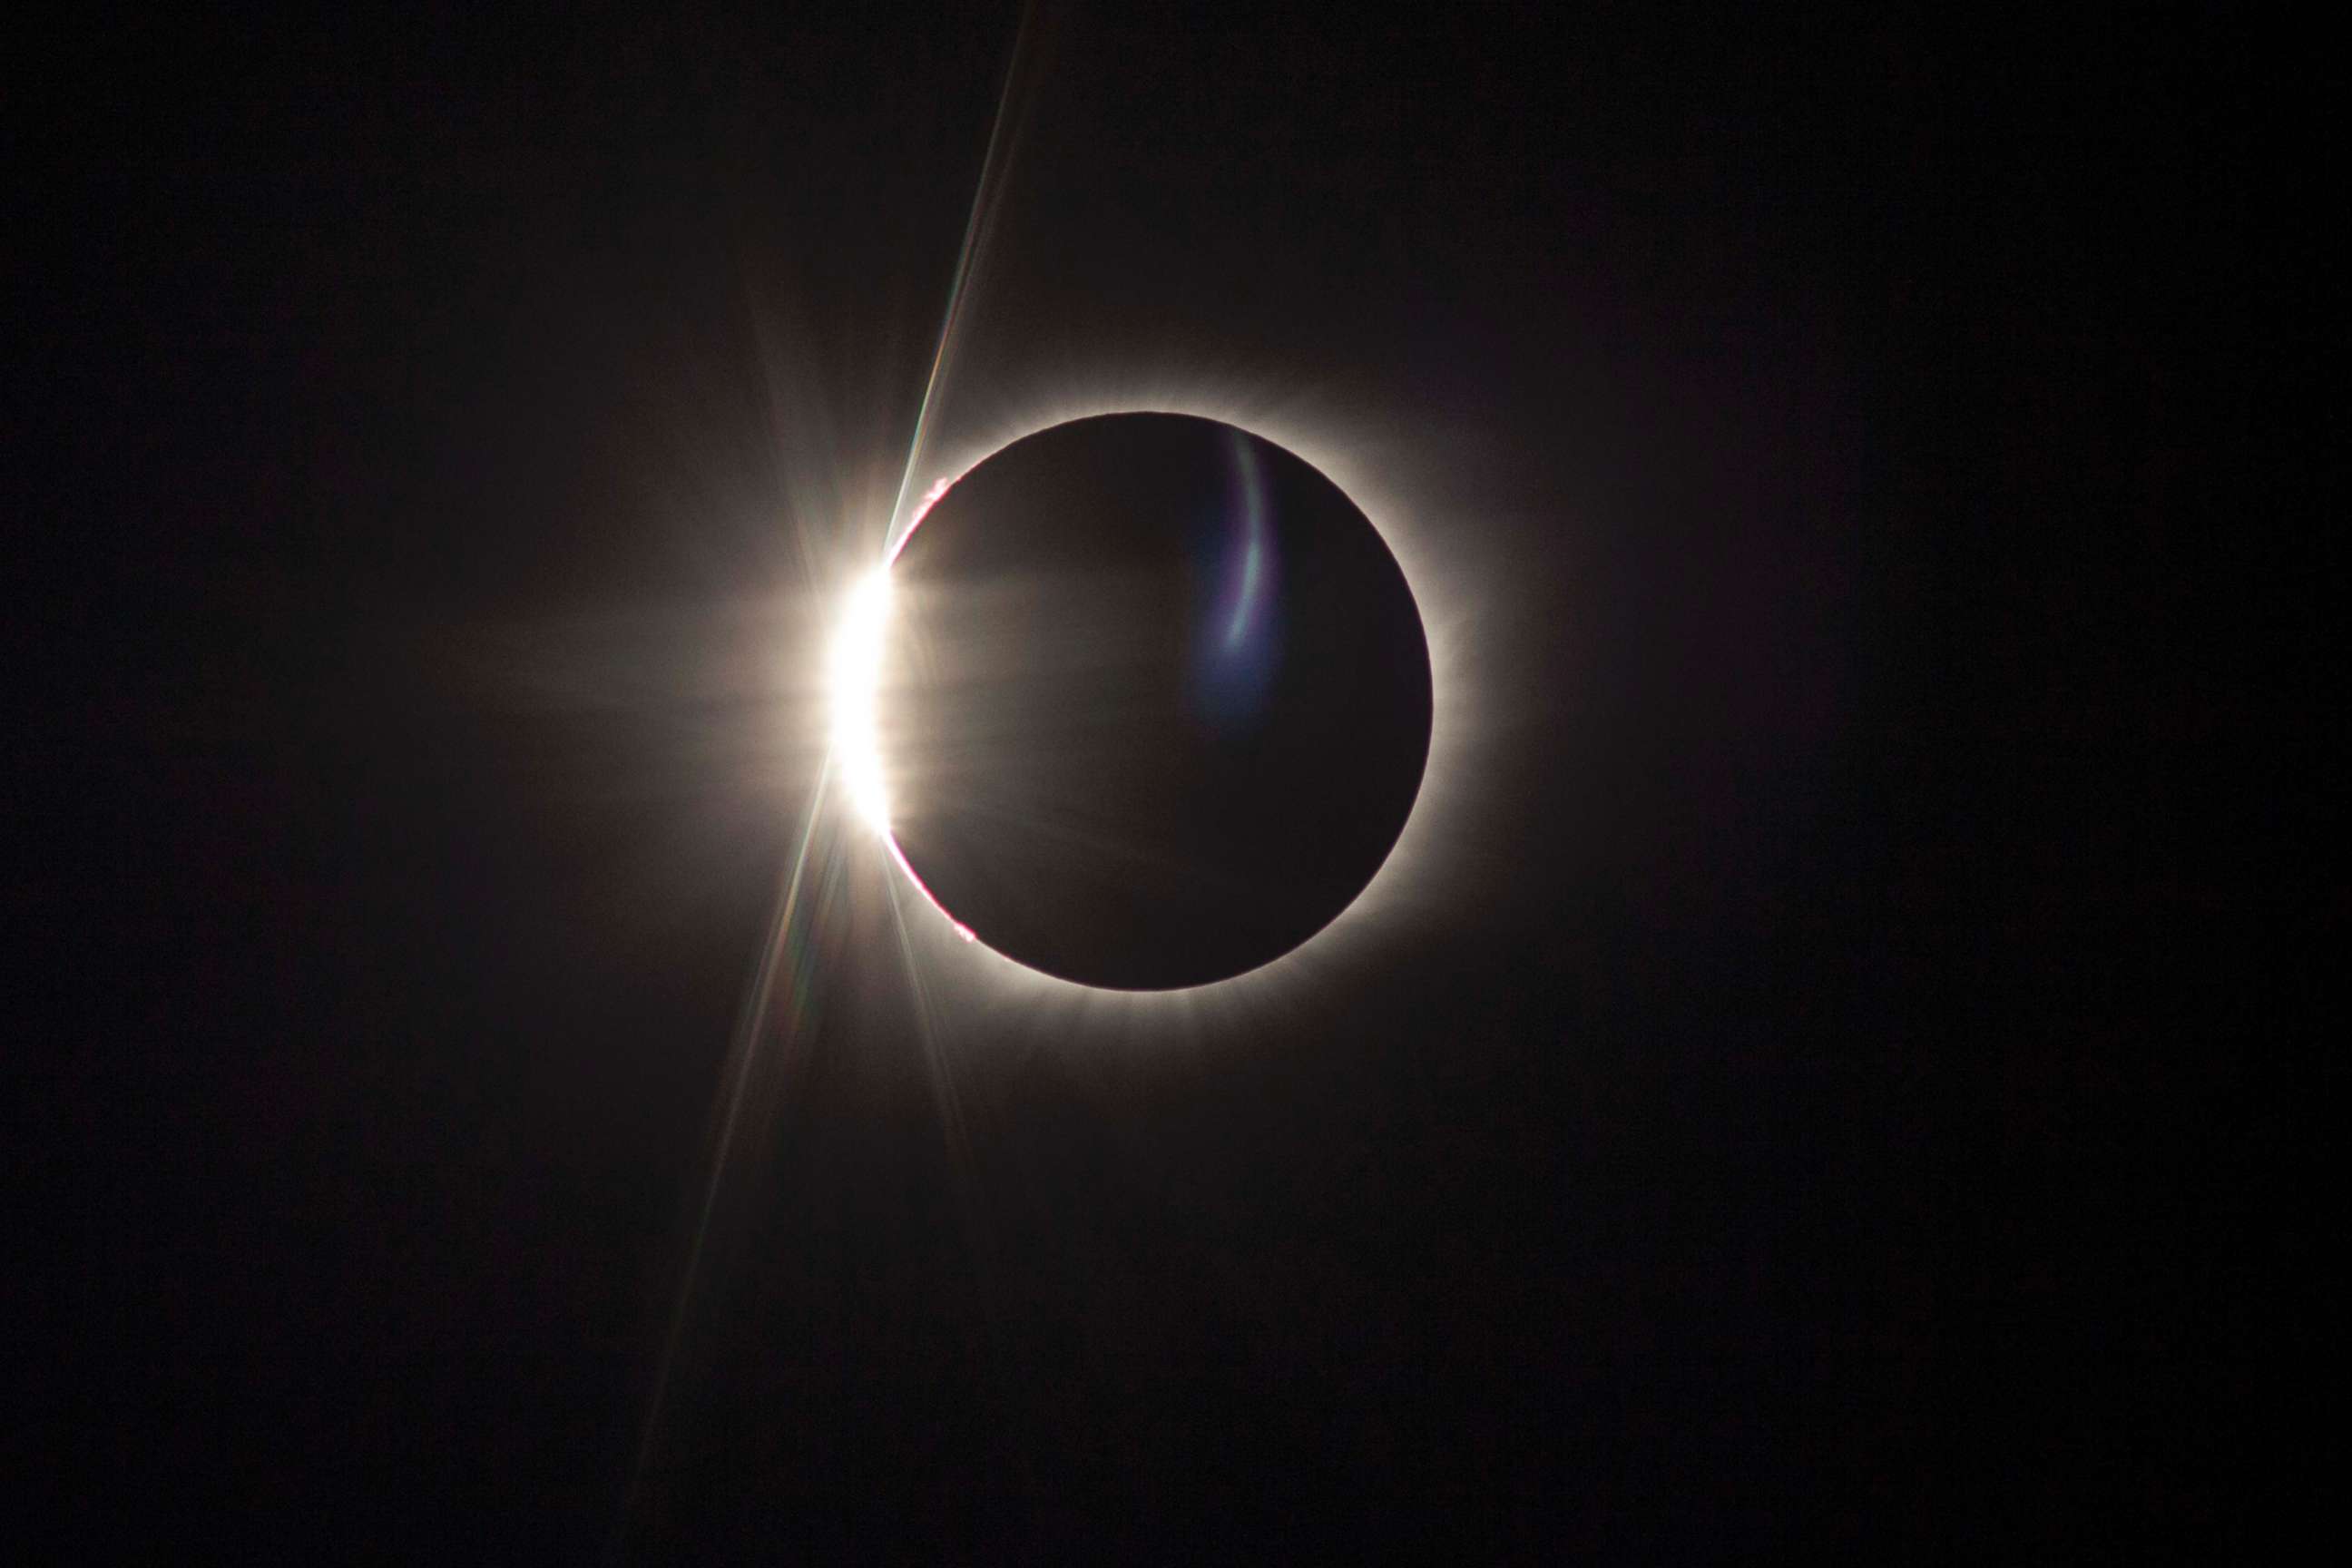 PHOTO: The "diamond ring" effect is visible as the Earth's moon passes in front of the sun during a solar eclipse viewed from Madras, Ore., Aug. 21, 2017.